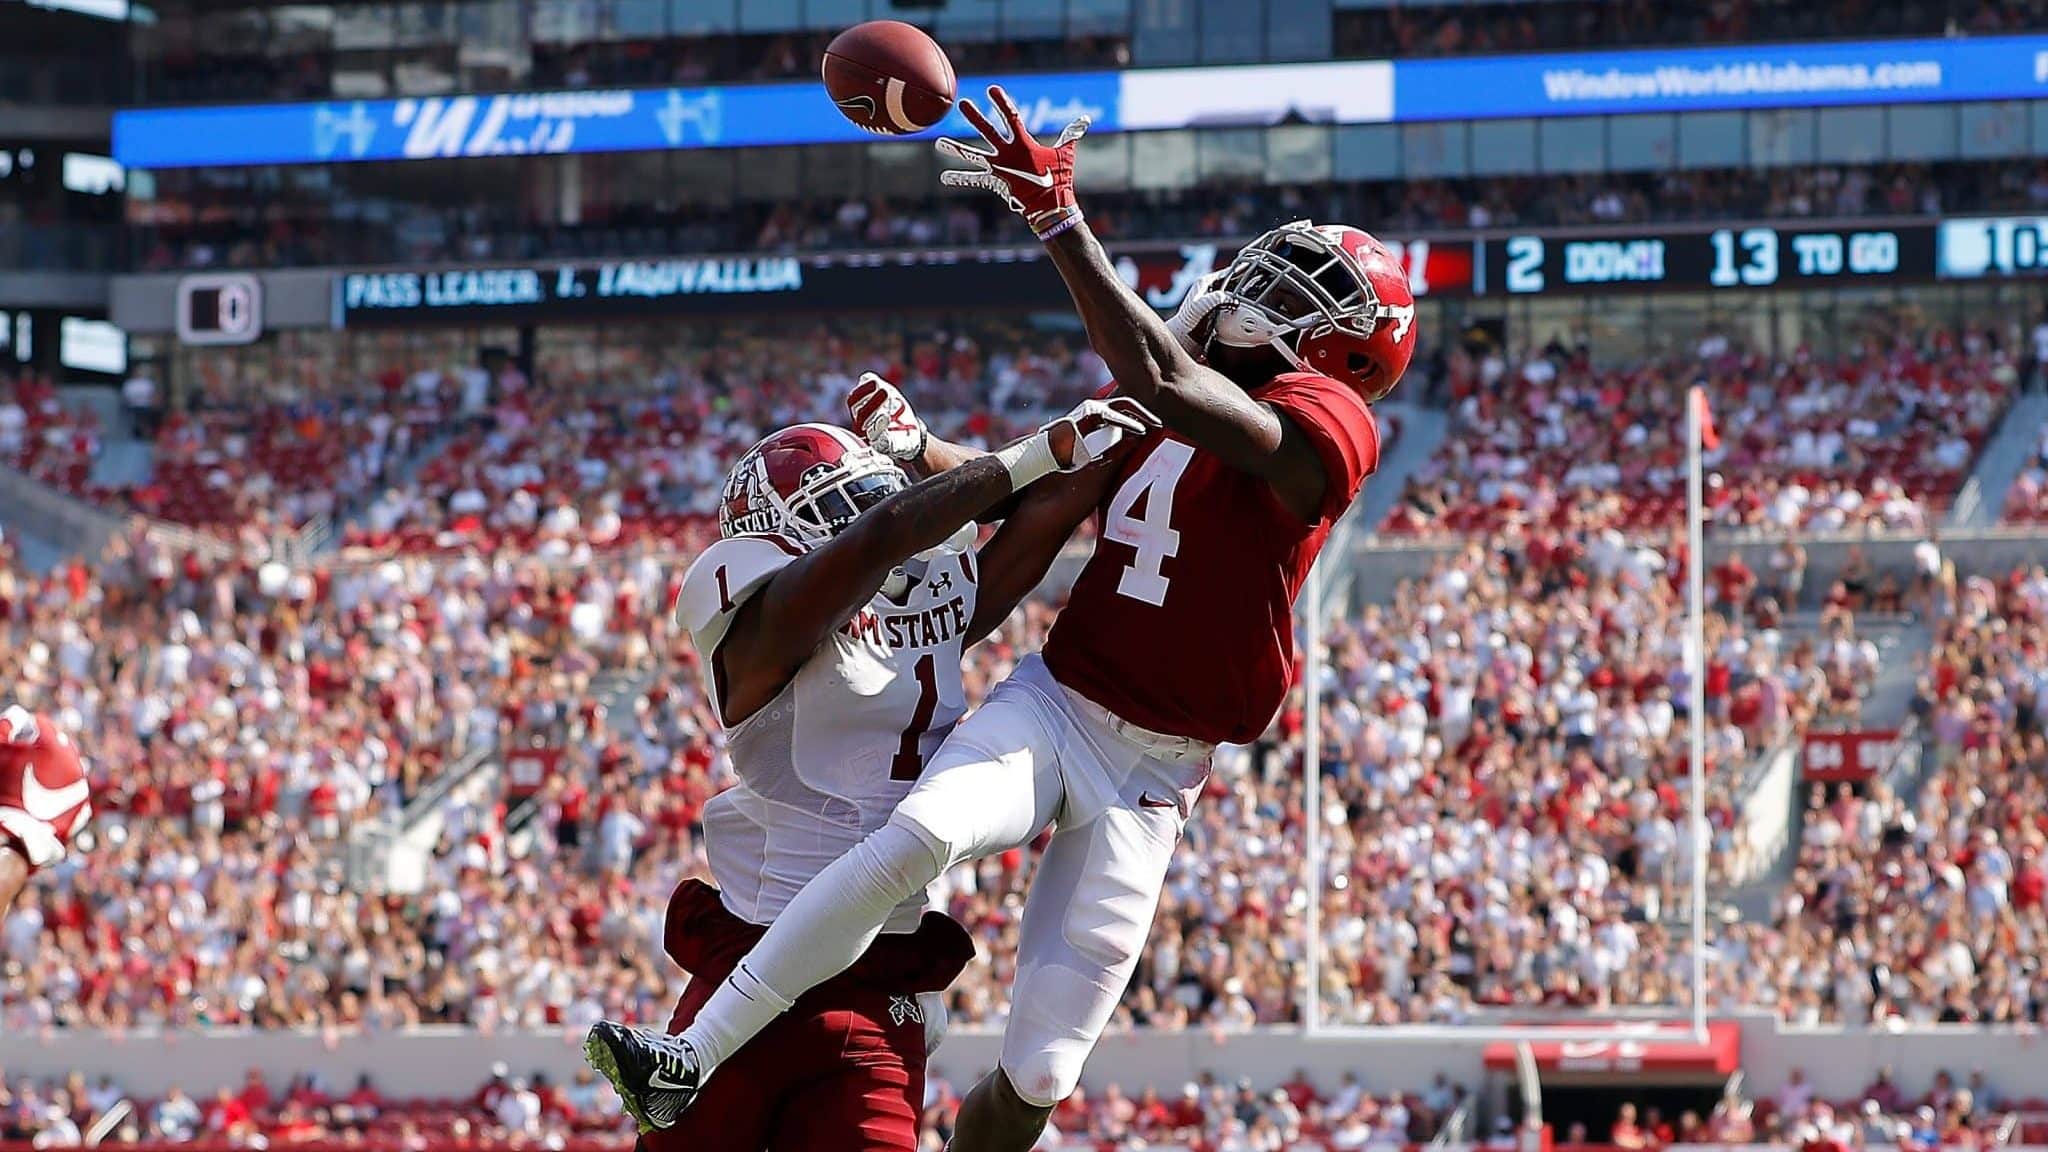 TUSCALOOSA, ALABAMA - SEPTEMBER 07: Jerry Jeudy #4 of the Alabama Crimson Tide fails to pull in this reception as he is defended by Ray Buford Jr. #1 of the New Mexico State Aggies at Bryant-Denny Stadium on September 07, 2019 in Tuscaloosa, Alabama.